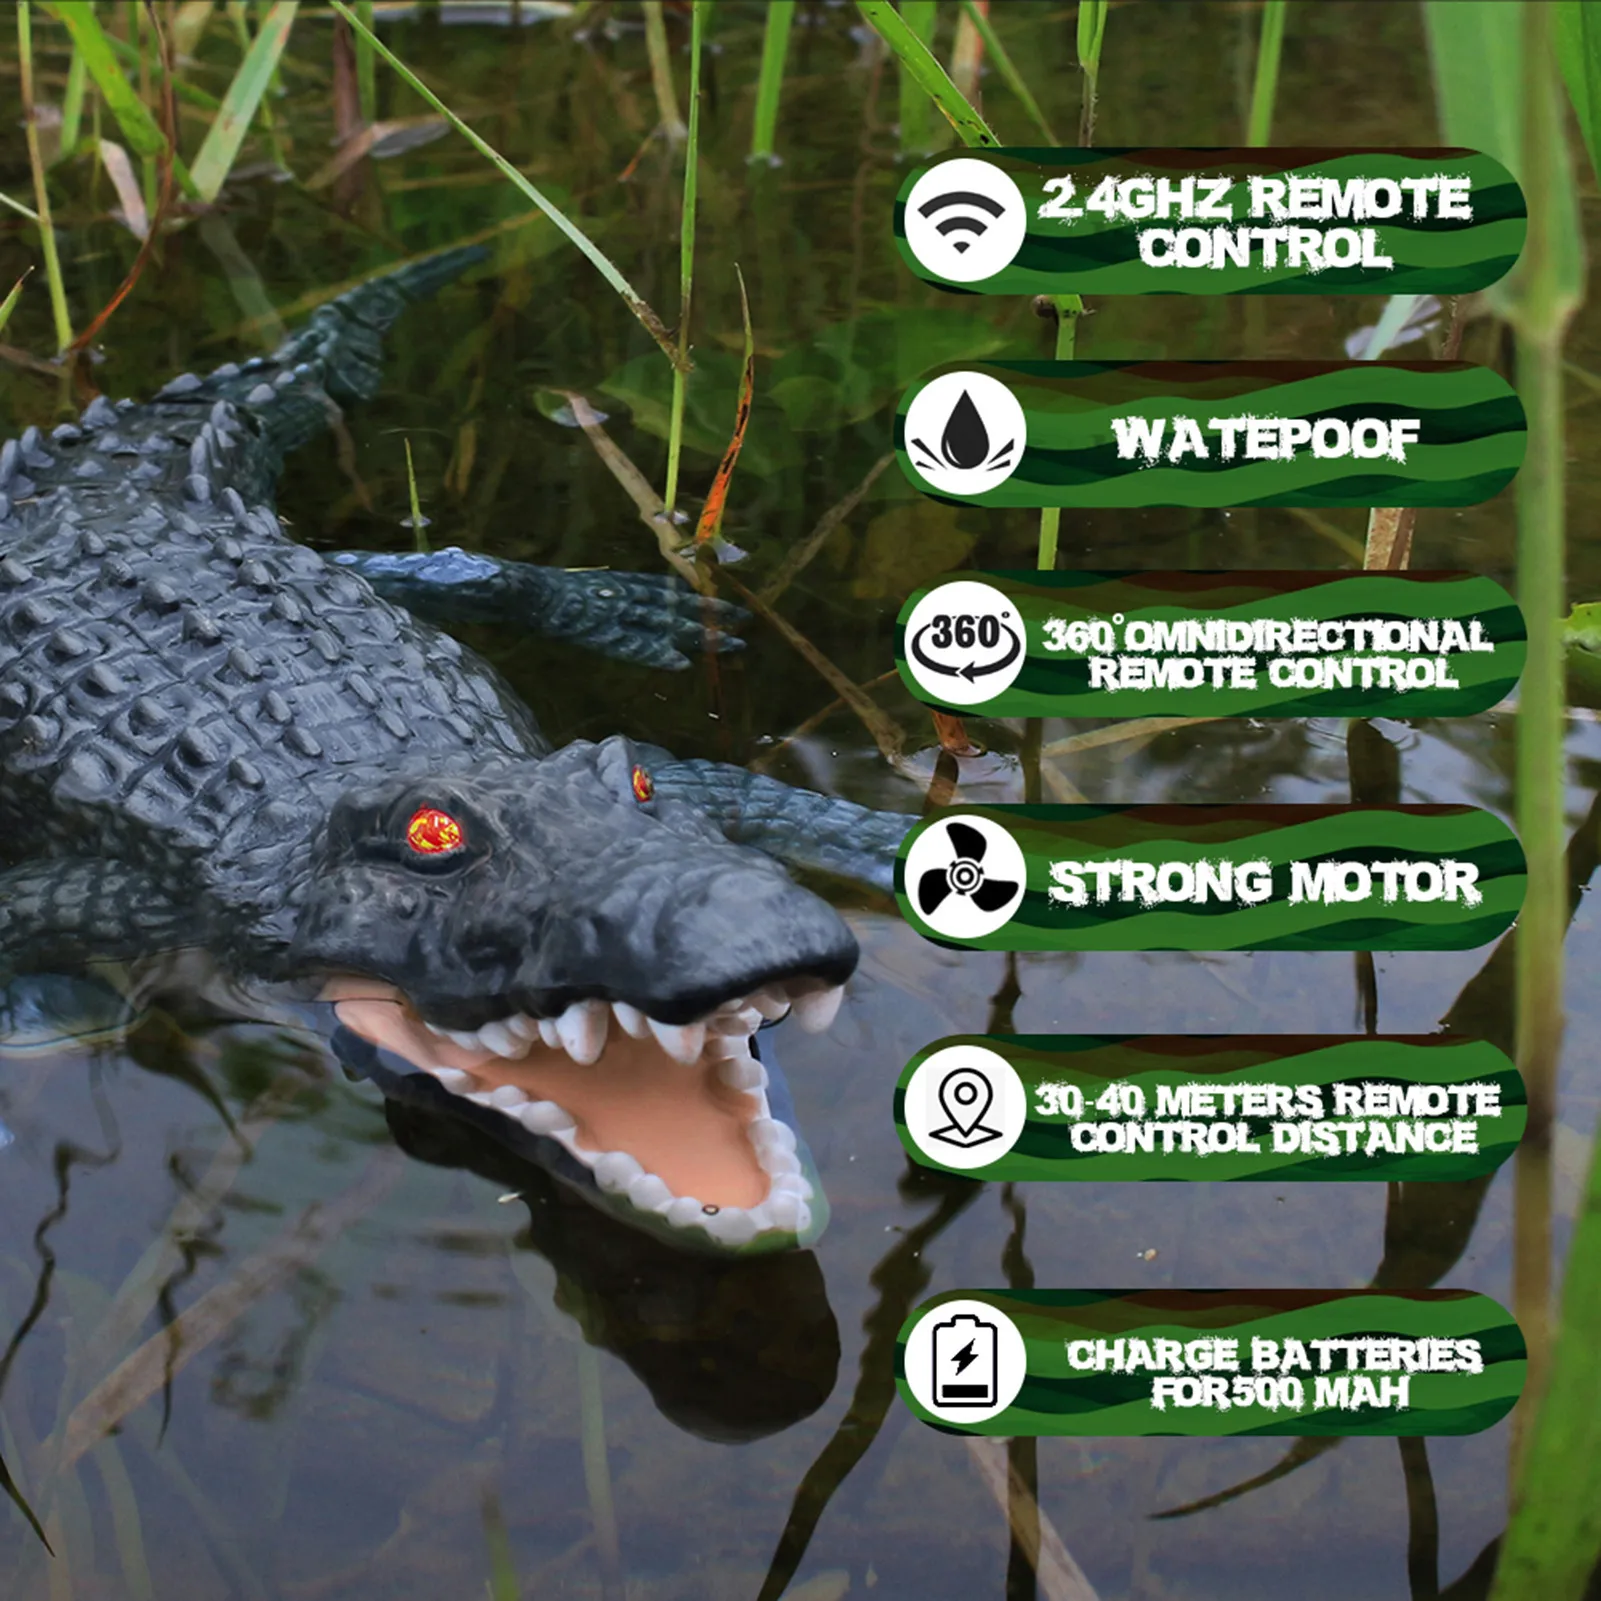 Lectric remote control alligator boats waterproof crocodile remote control toy for kids thumb200